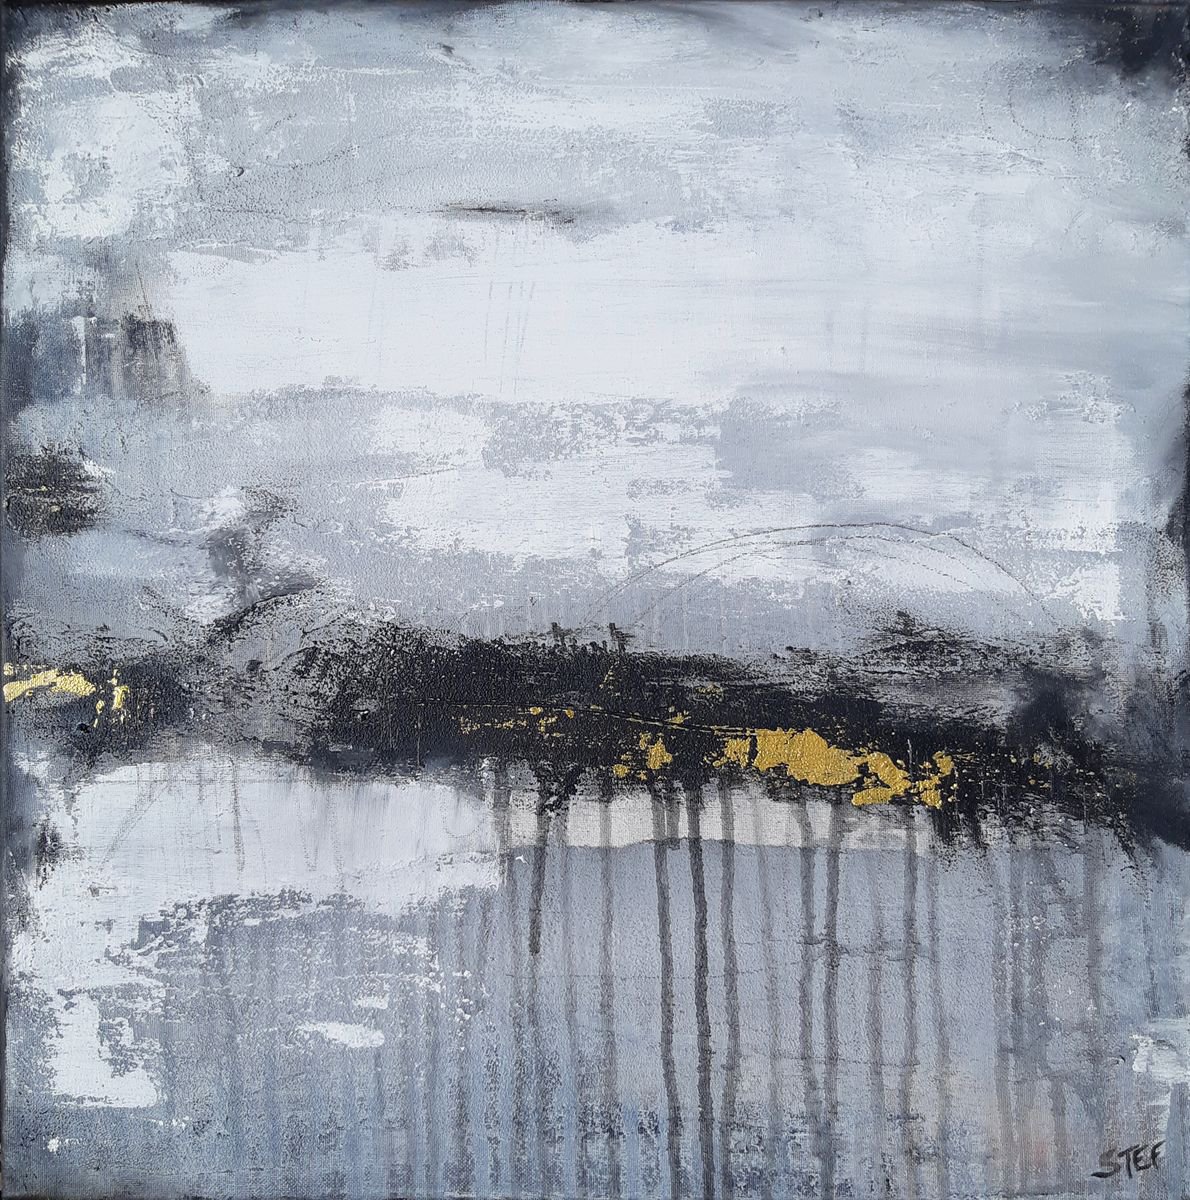 ’PATHS AND TRACKS’ #5 | Abstract landscape by Stefanie Rogge